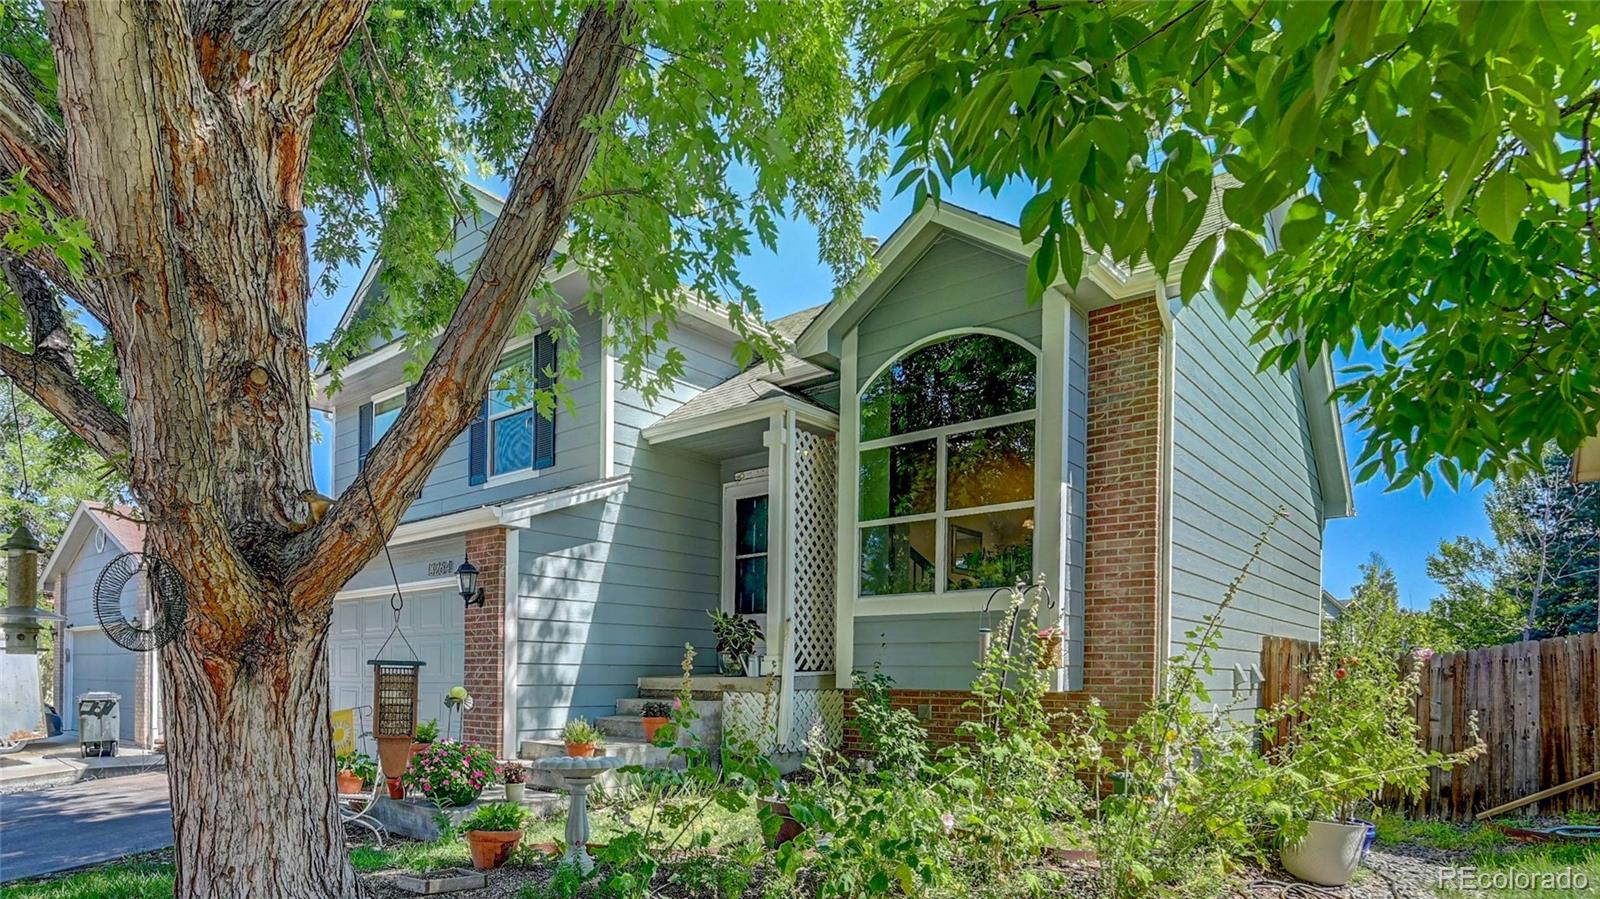 Report Image for 13264  Osage Street,Westminster, Colorado